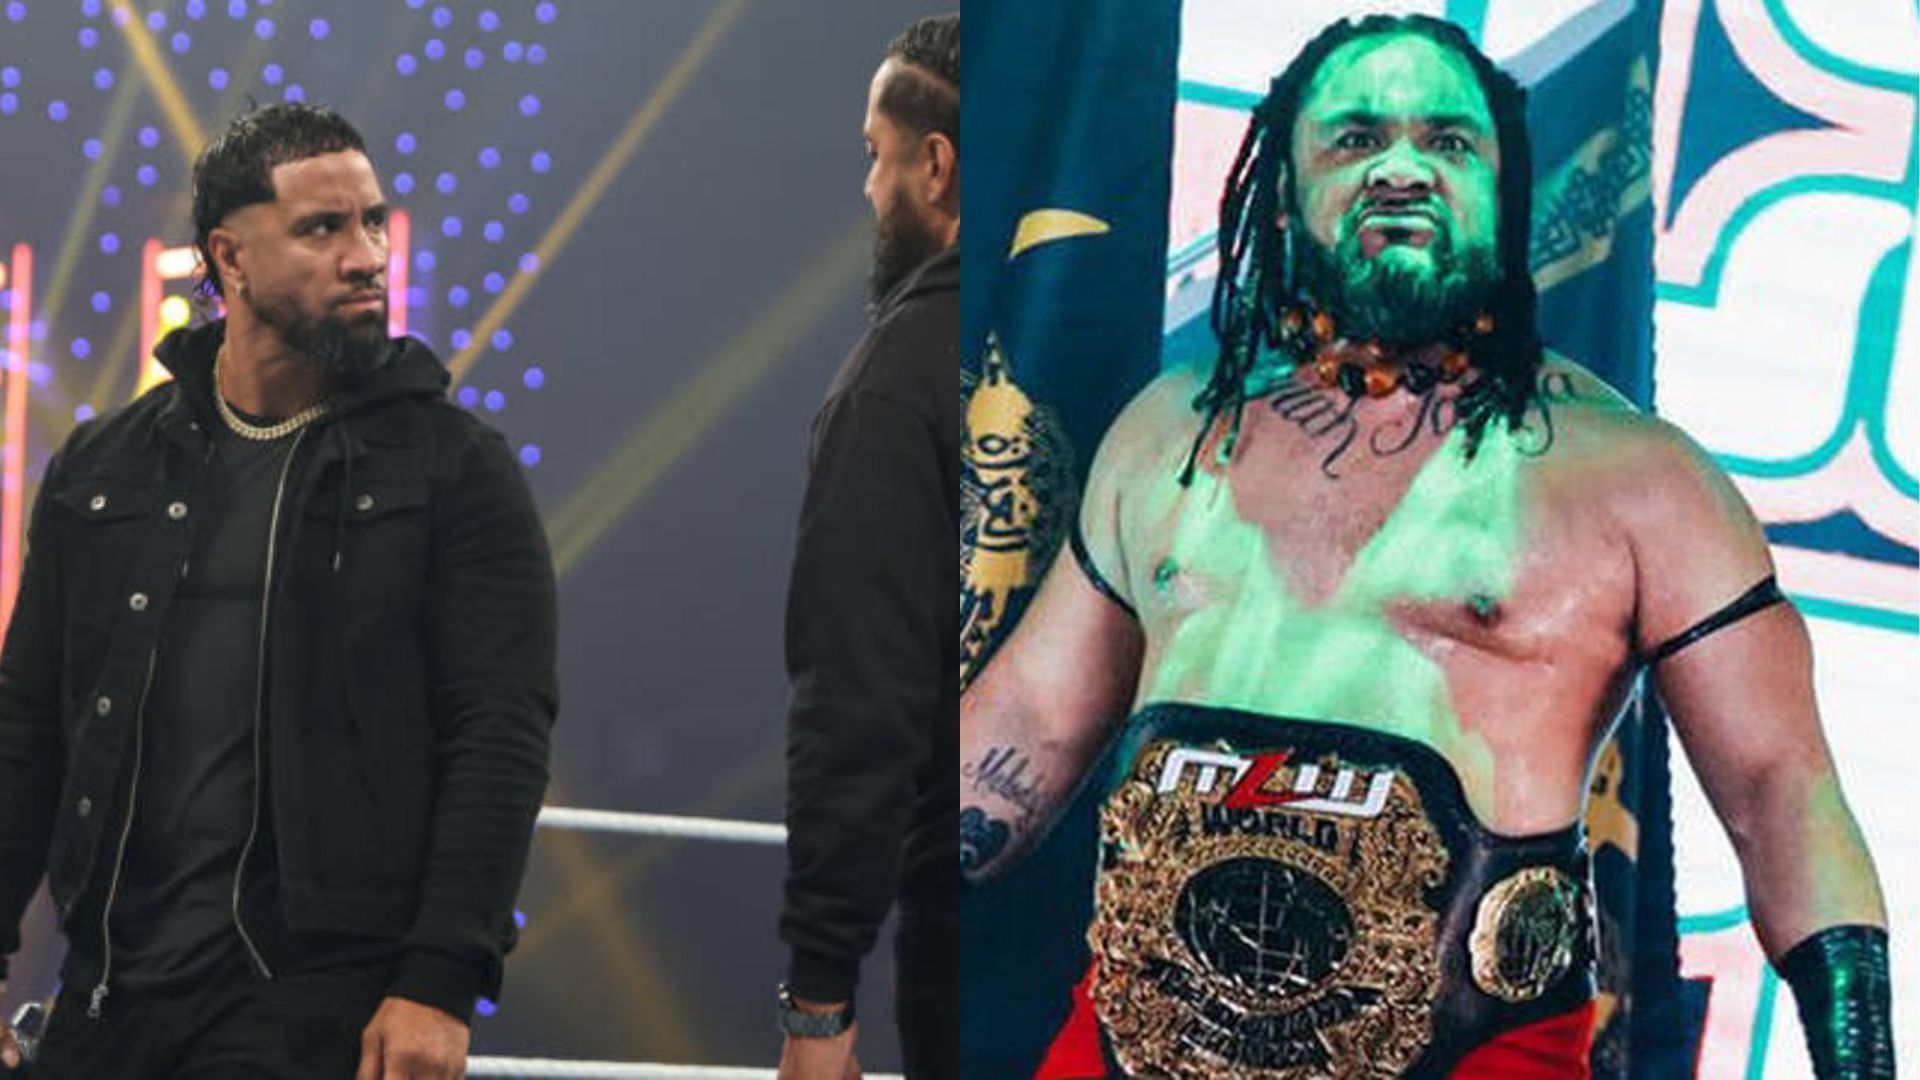 Jey Uso announced that he &quot;quit&quot; WWE after recent confrontations with Roman Reigns and Jimmy Uso